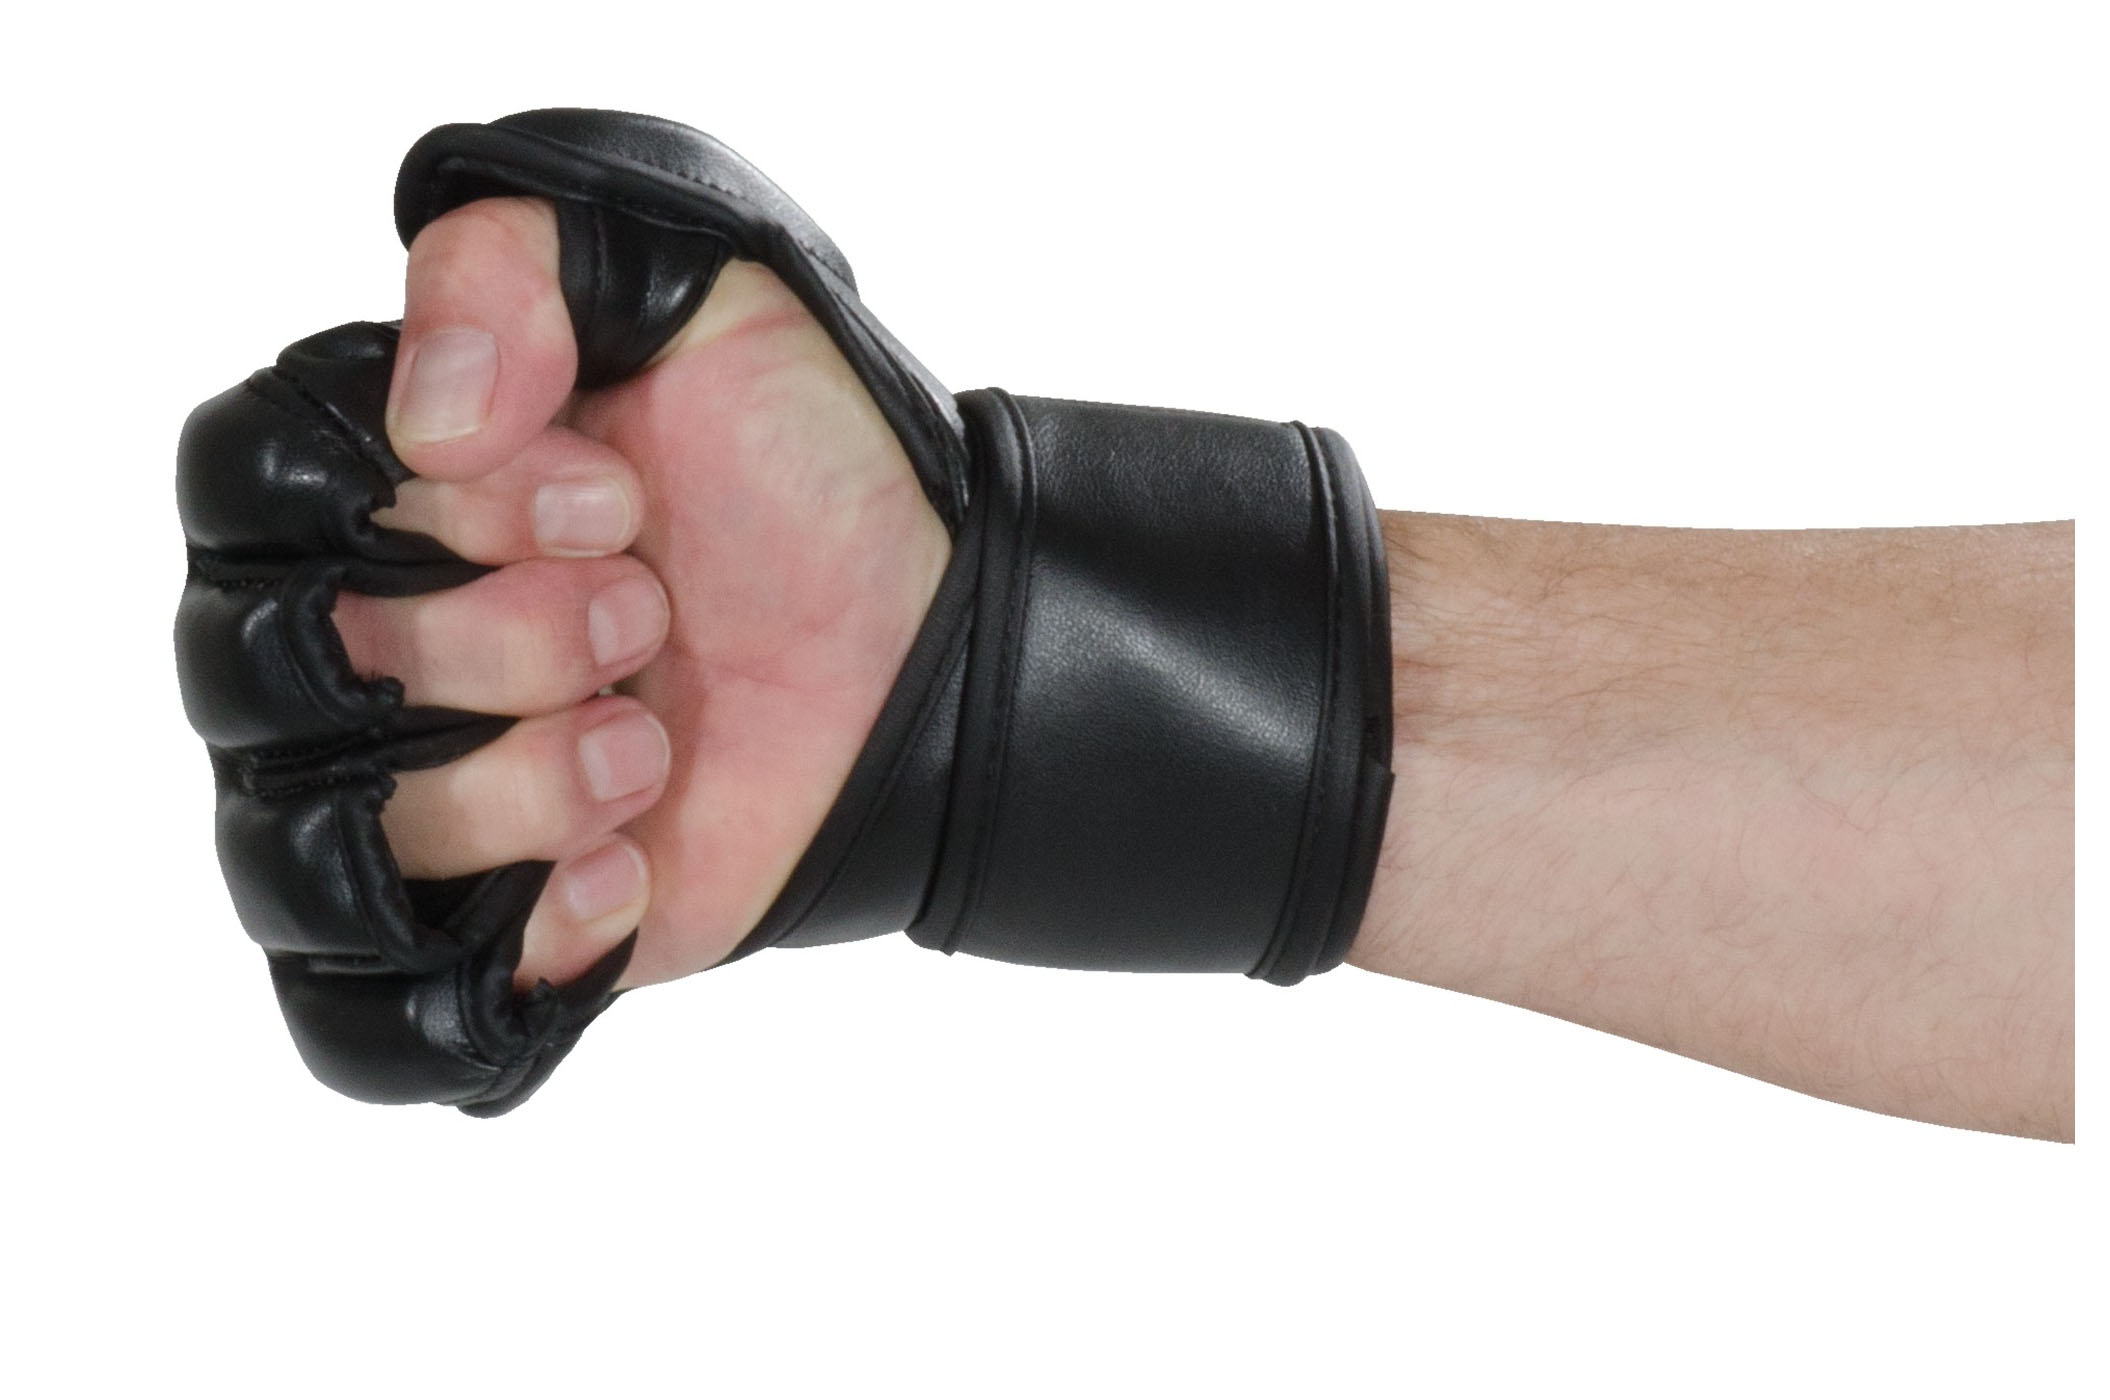 How to Use Mma Gloves 